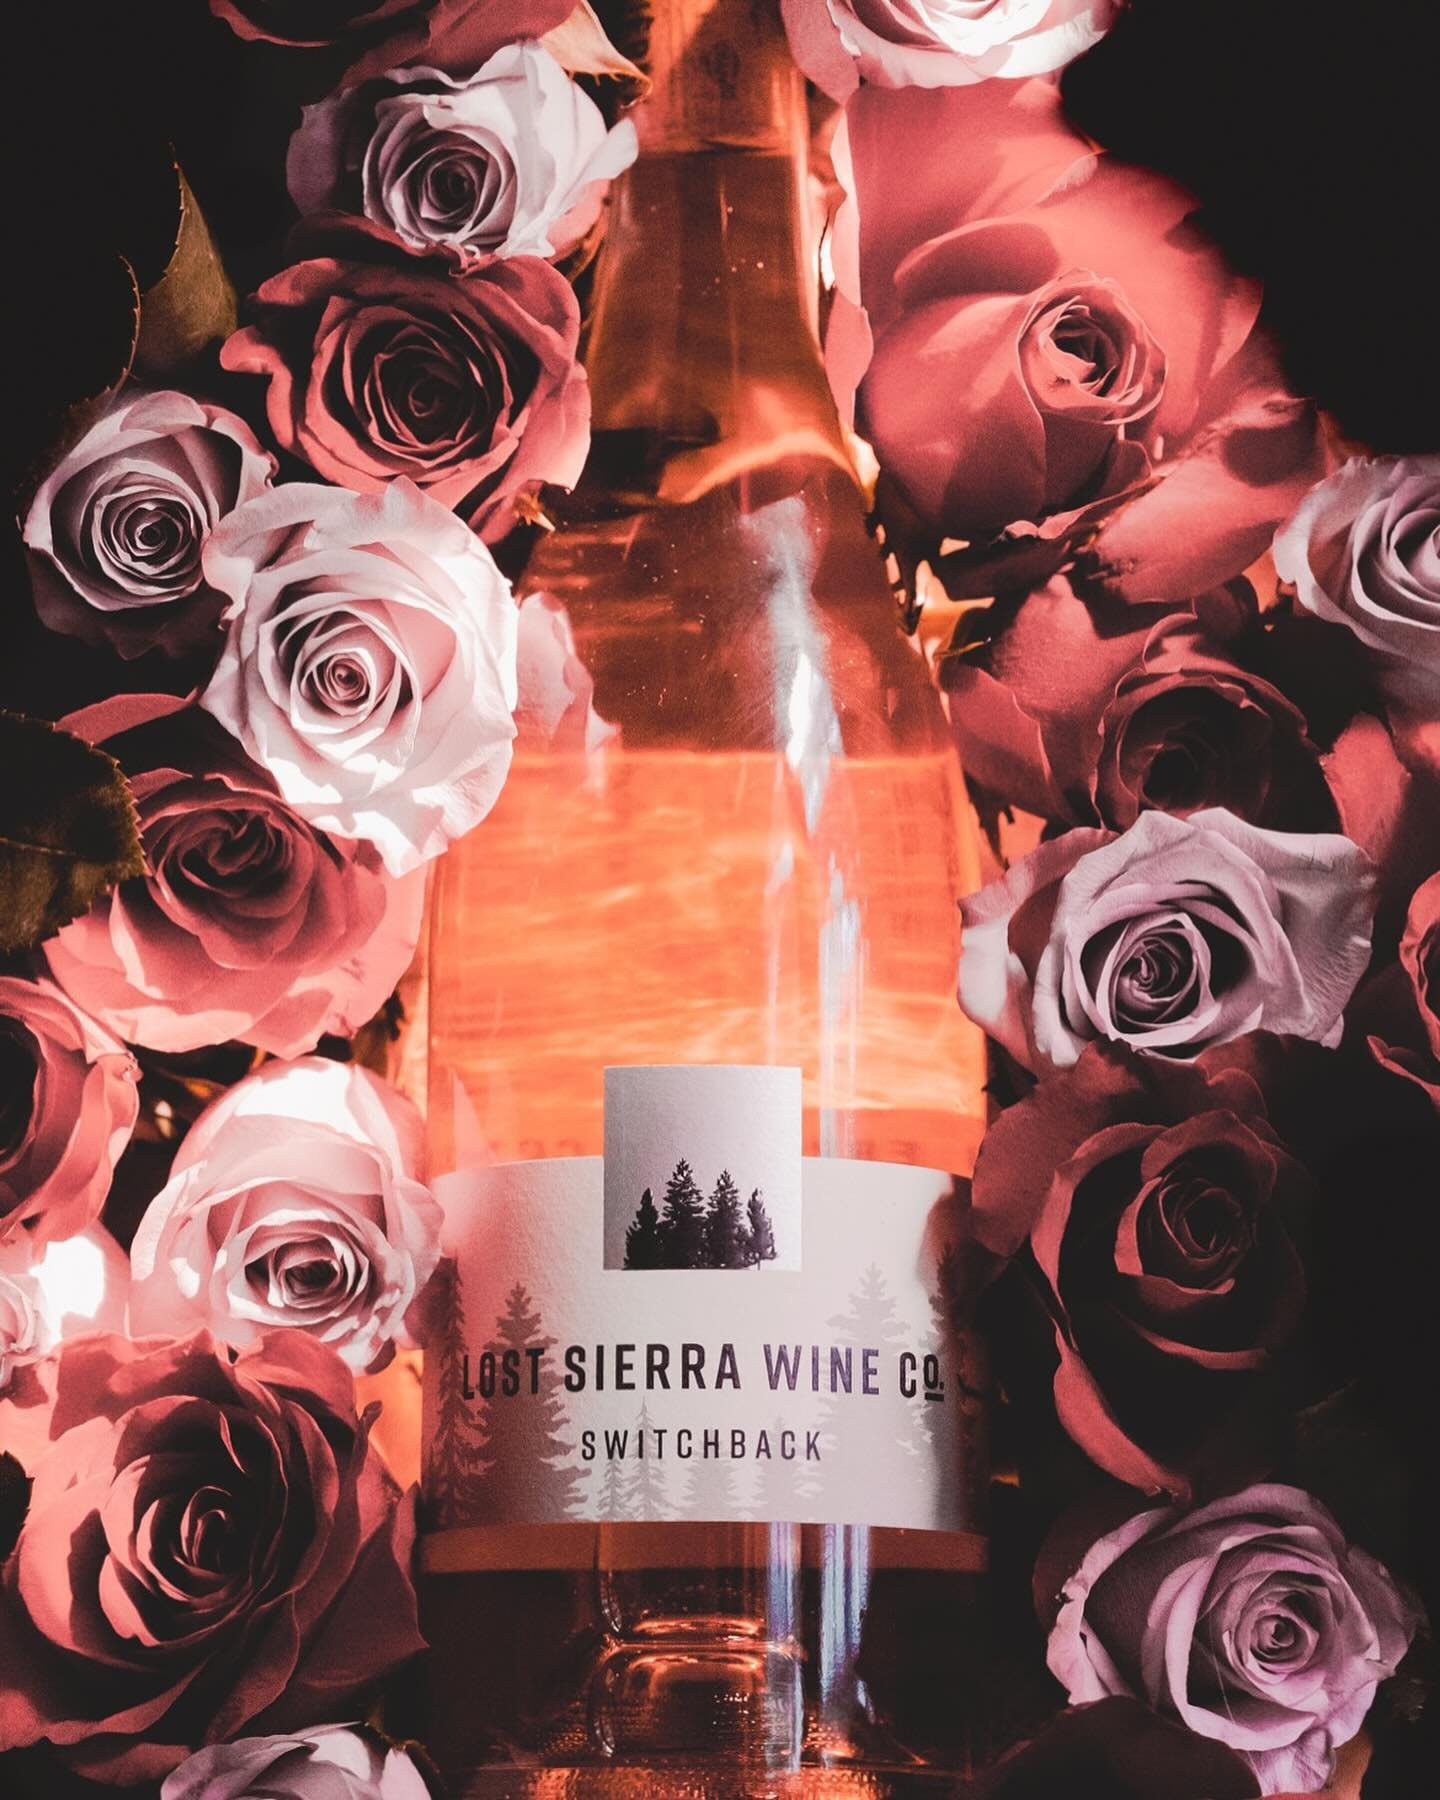 ✨Celebrate Mom with a bouquet of Ros&eacute;! Our 2023 Ros&eacute; of Pinot Noir is a crisp, refreshing, delicate wine perfect for a Mother&rsquo;s Day celebration ✨
Shop our Ros&eacute; by using the link in our bio.
.
.
#winelover #ros&eacute; #rose